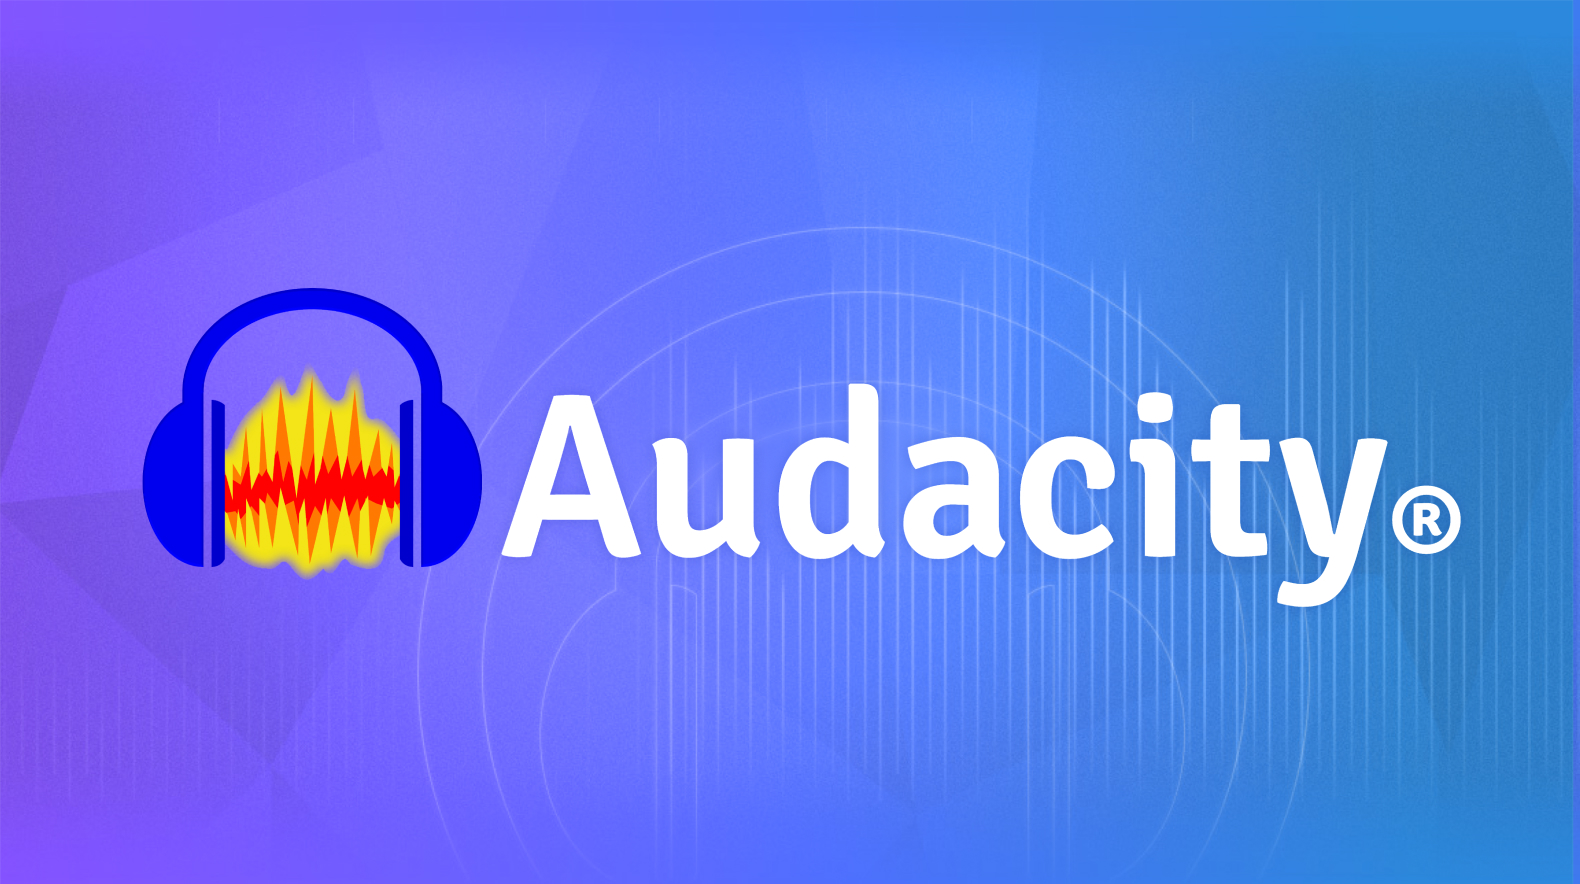 Audacity ® | Free Audio editor, recorder, music making and more!